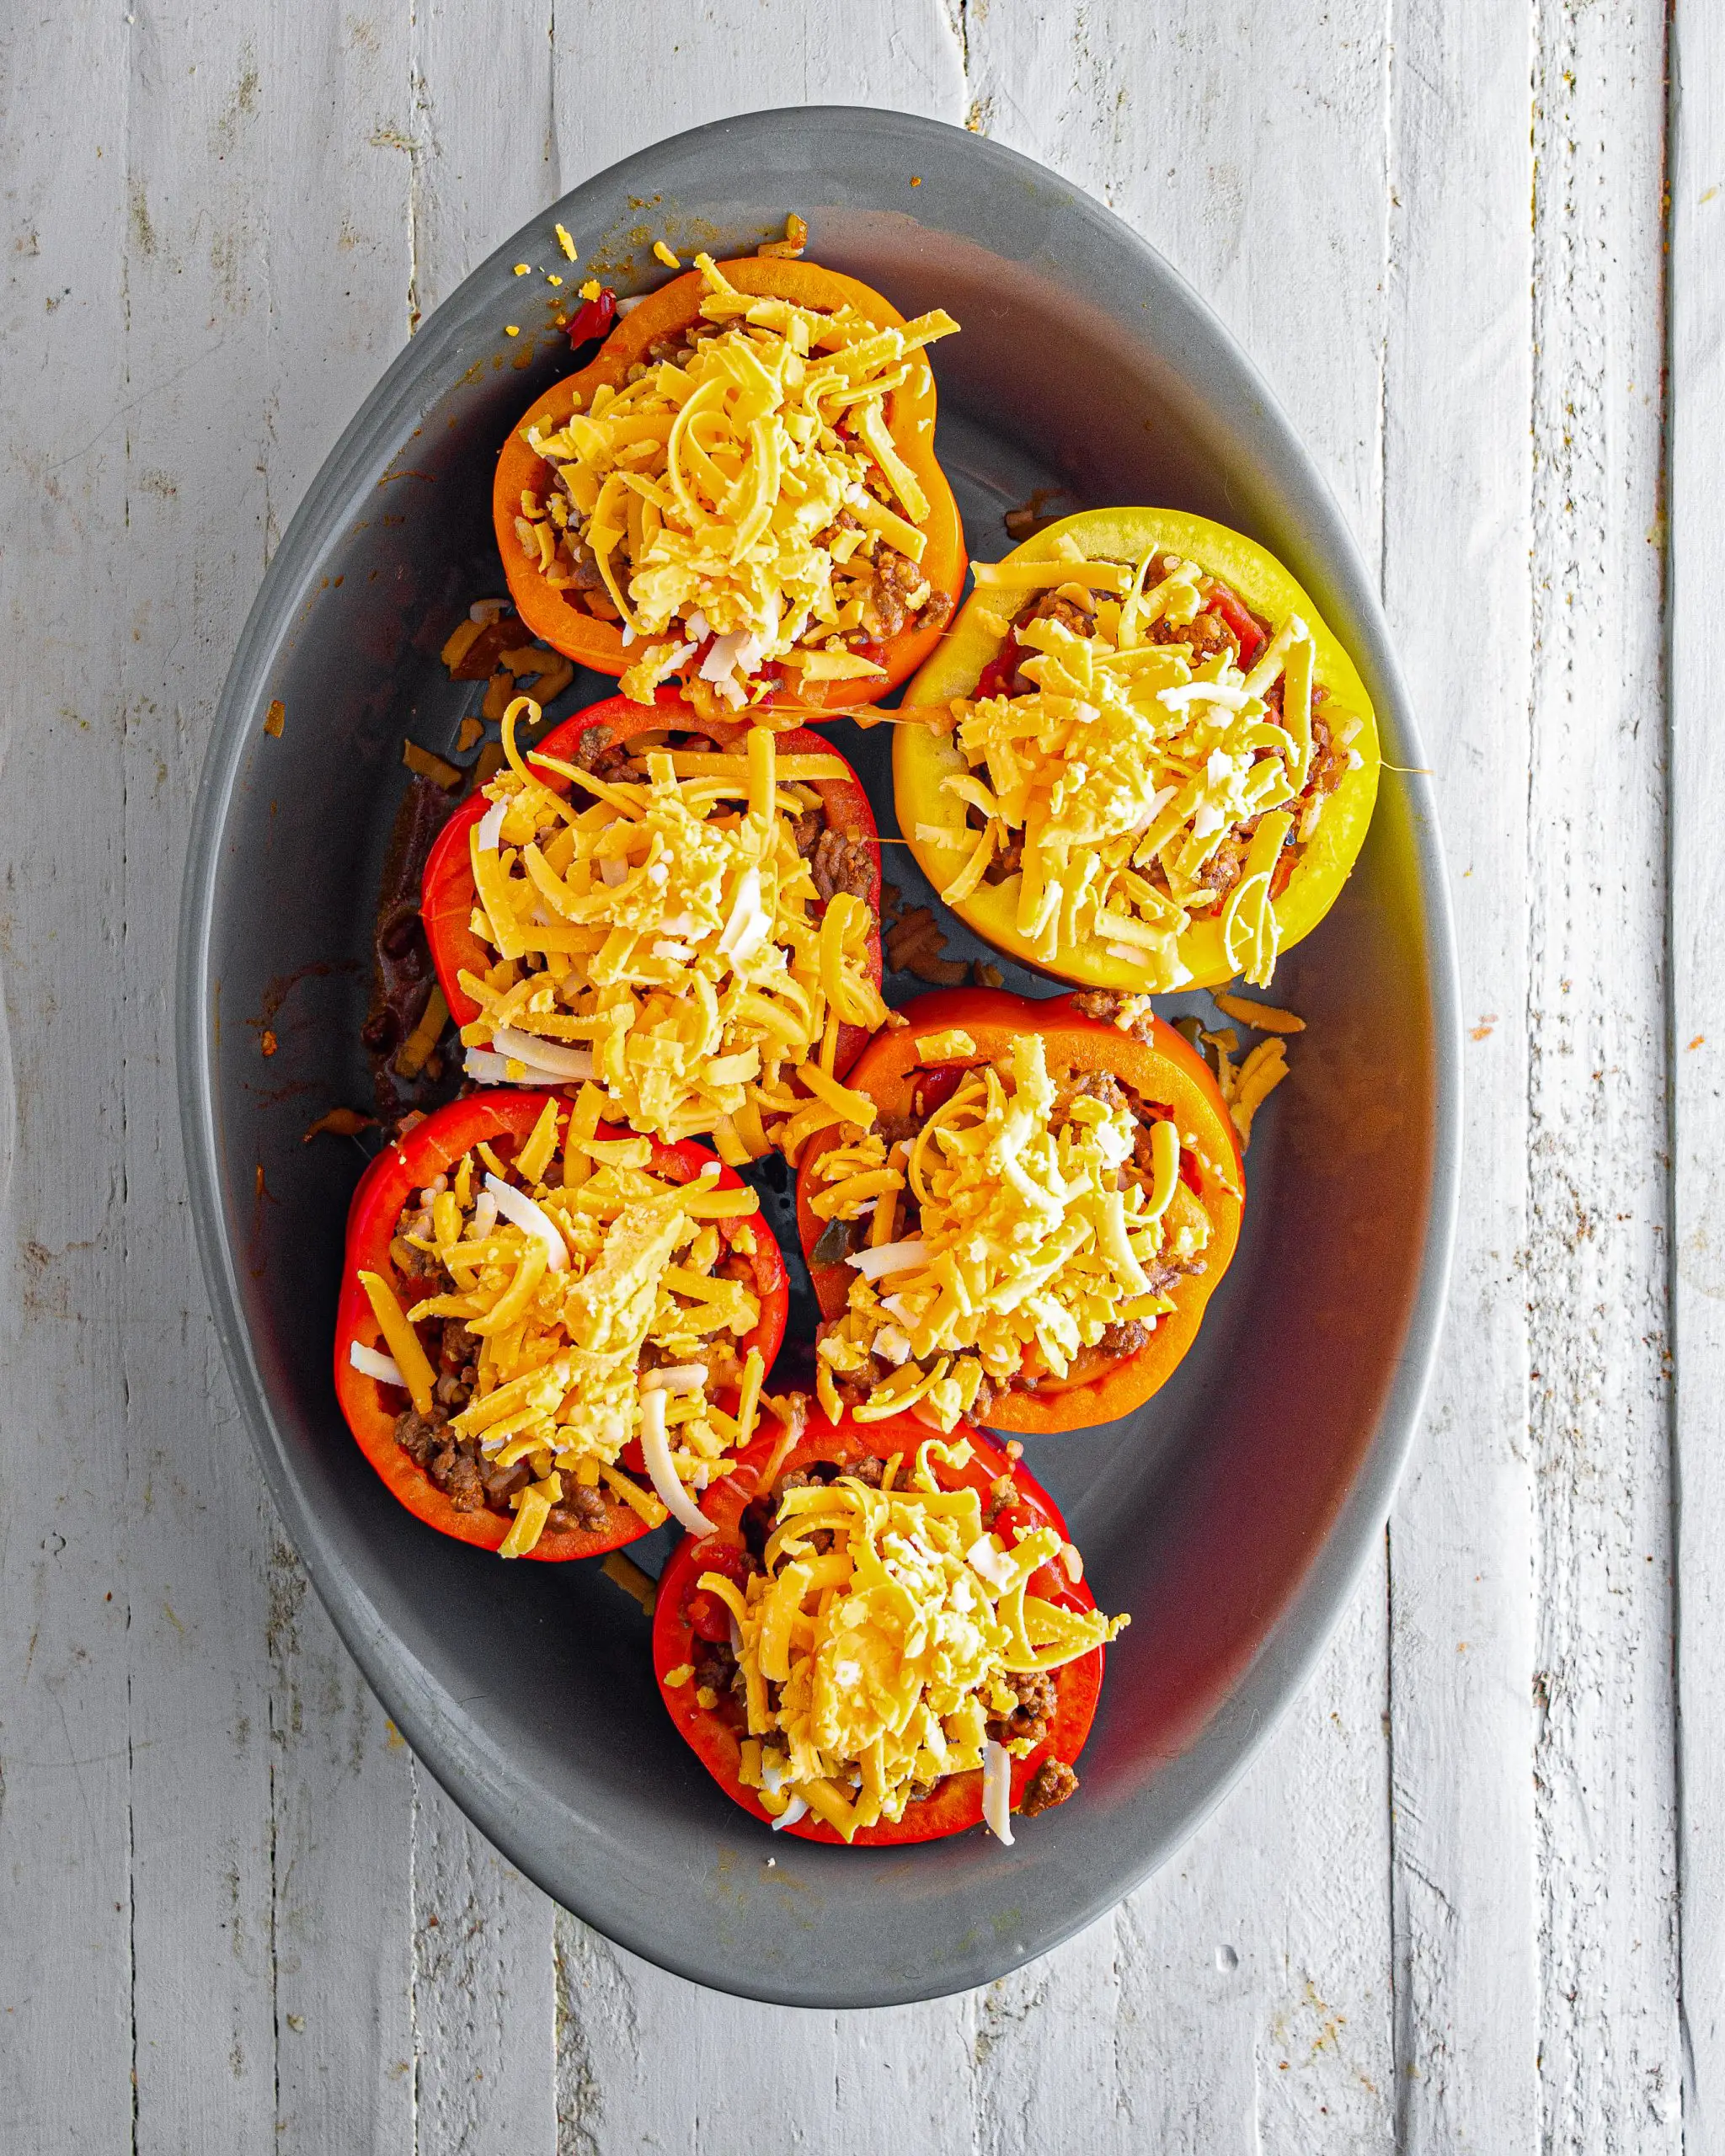 Old Fashioned Stuffed Bell Peppers